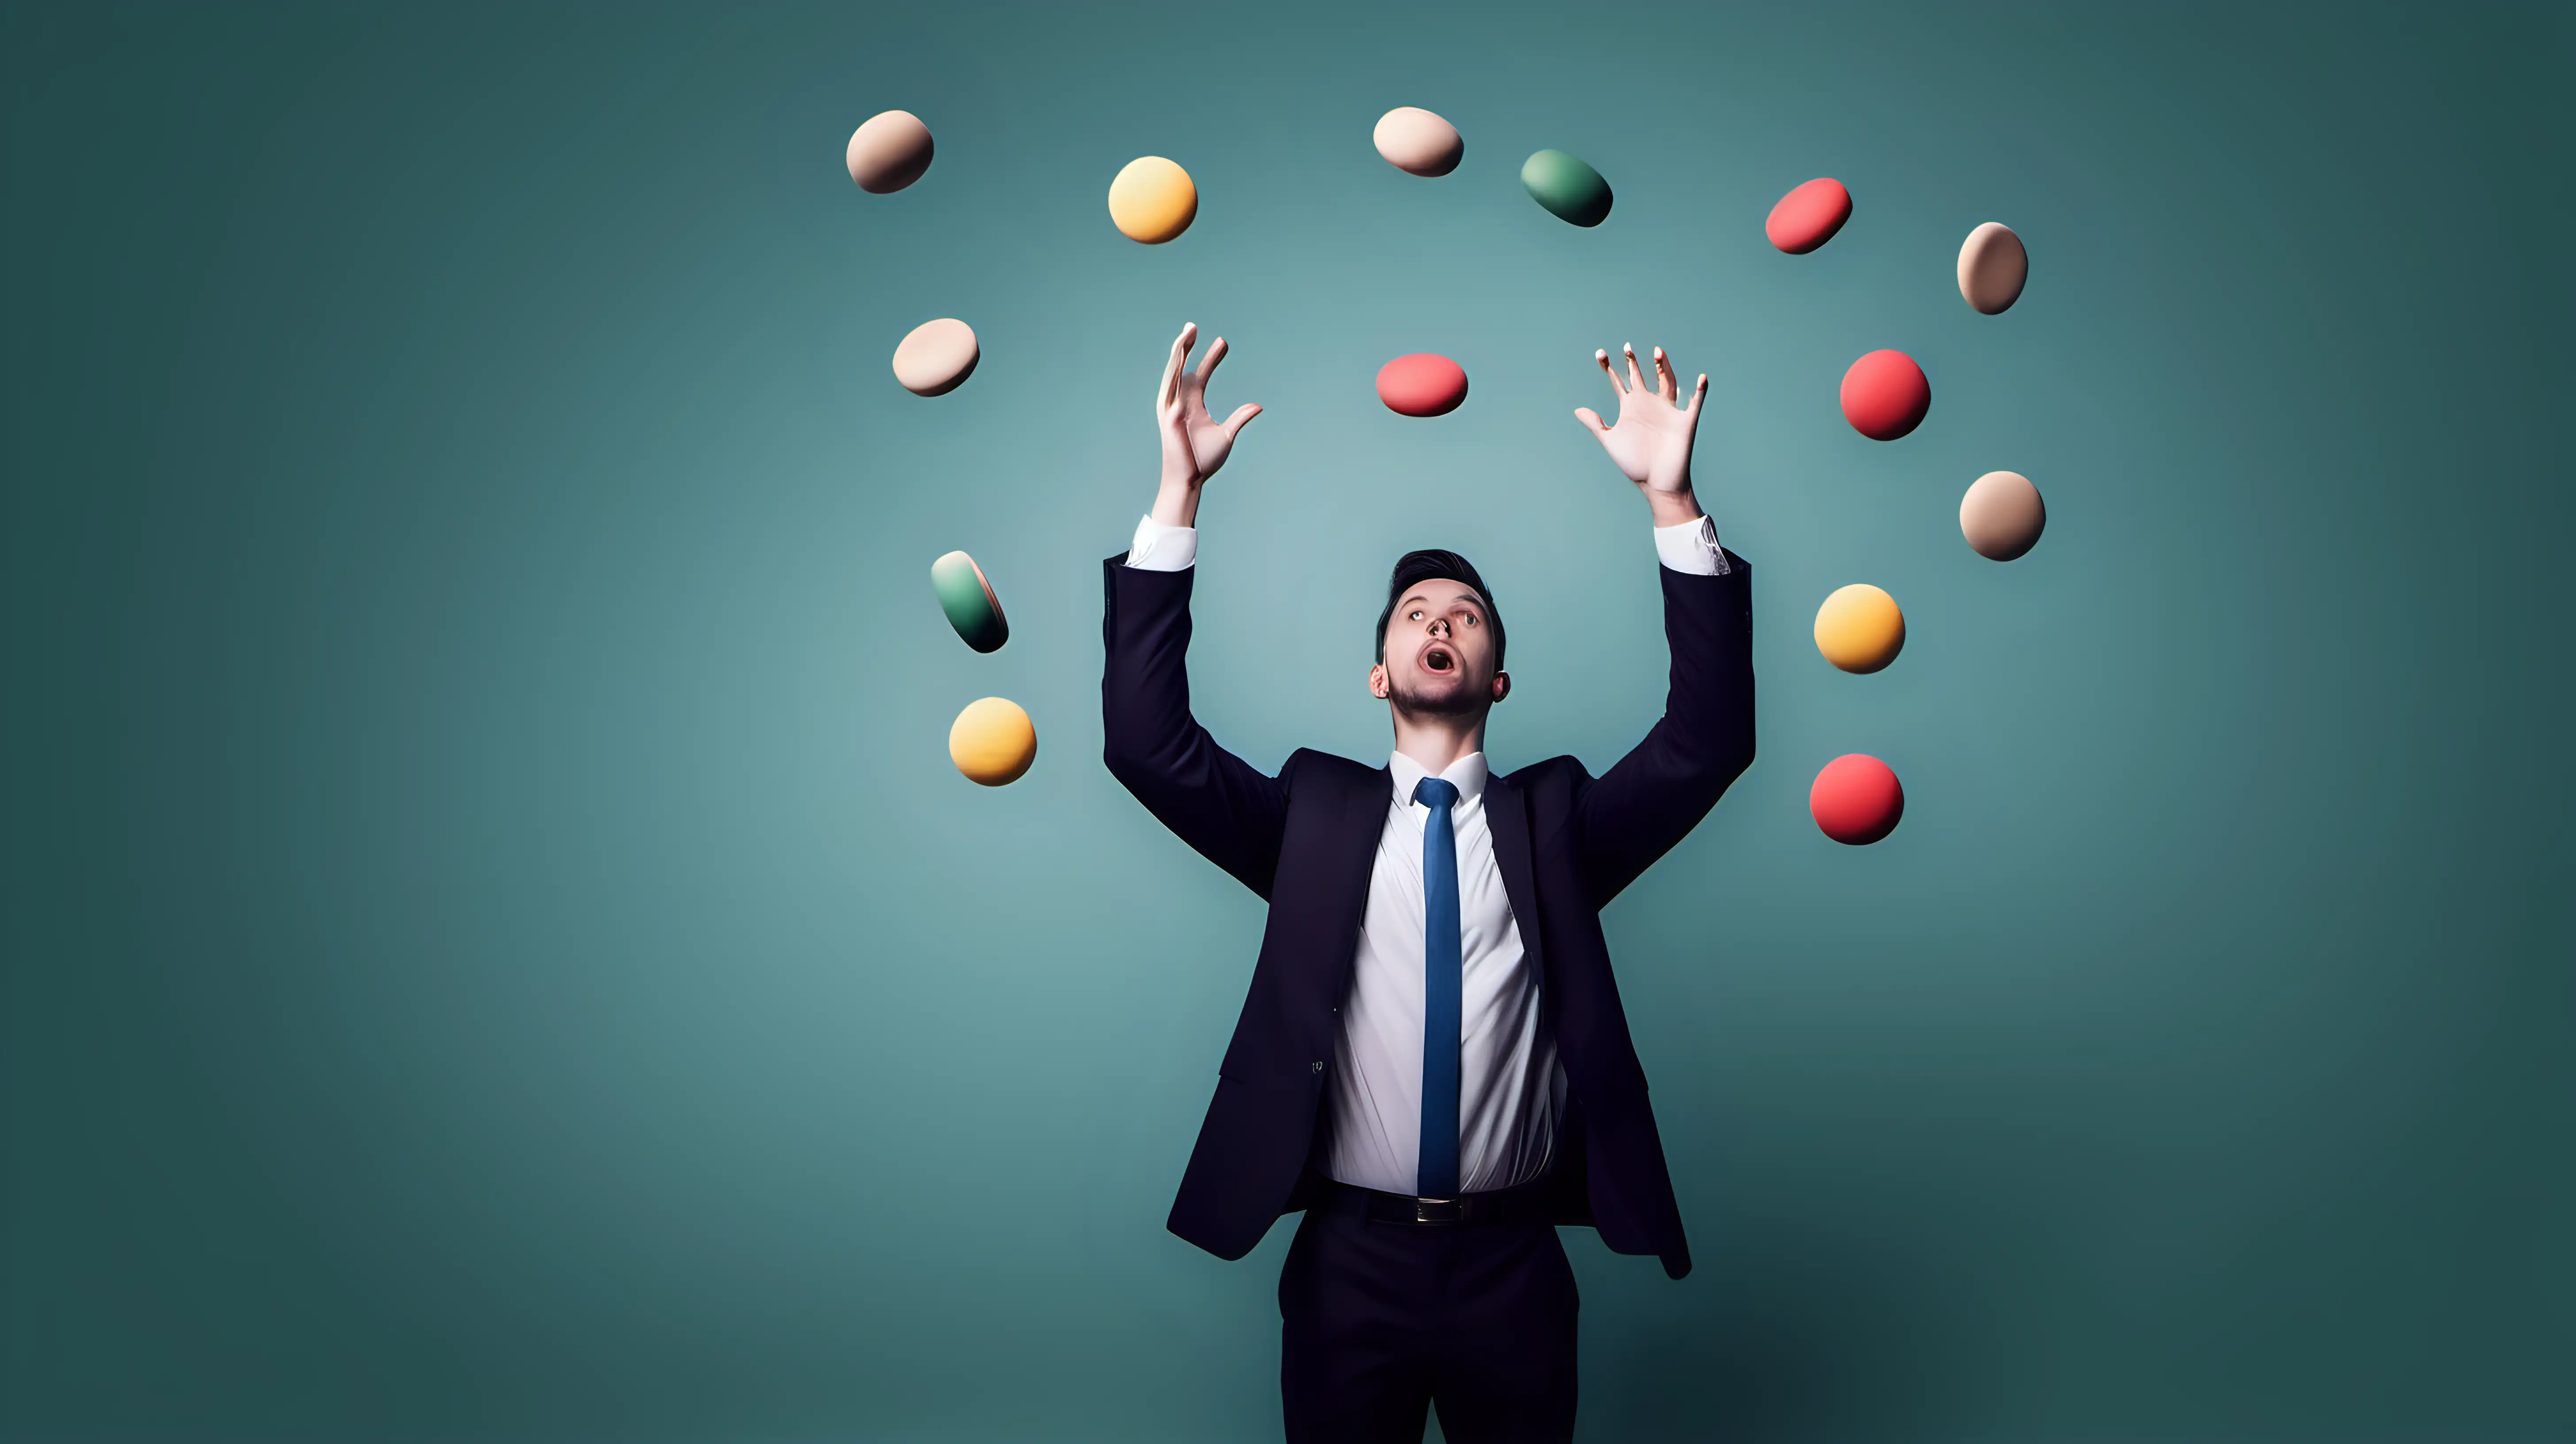 Craft an image of a person juggling multiple responsibilities, overwhelmed and fatigued, conveying the mental and emotional strain that comes with hard work.